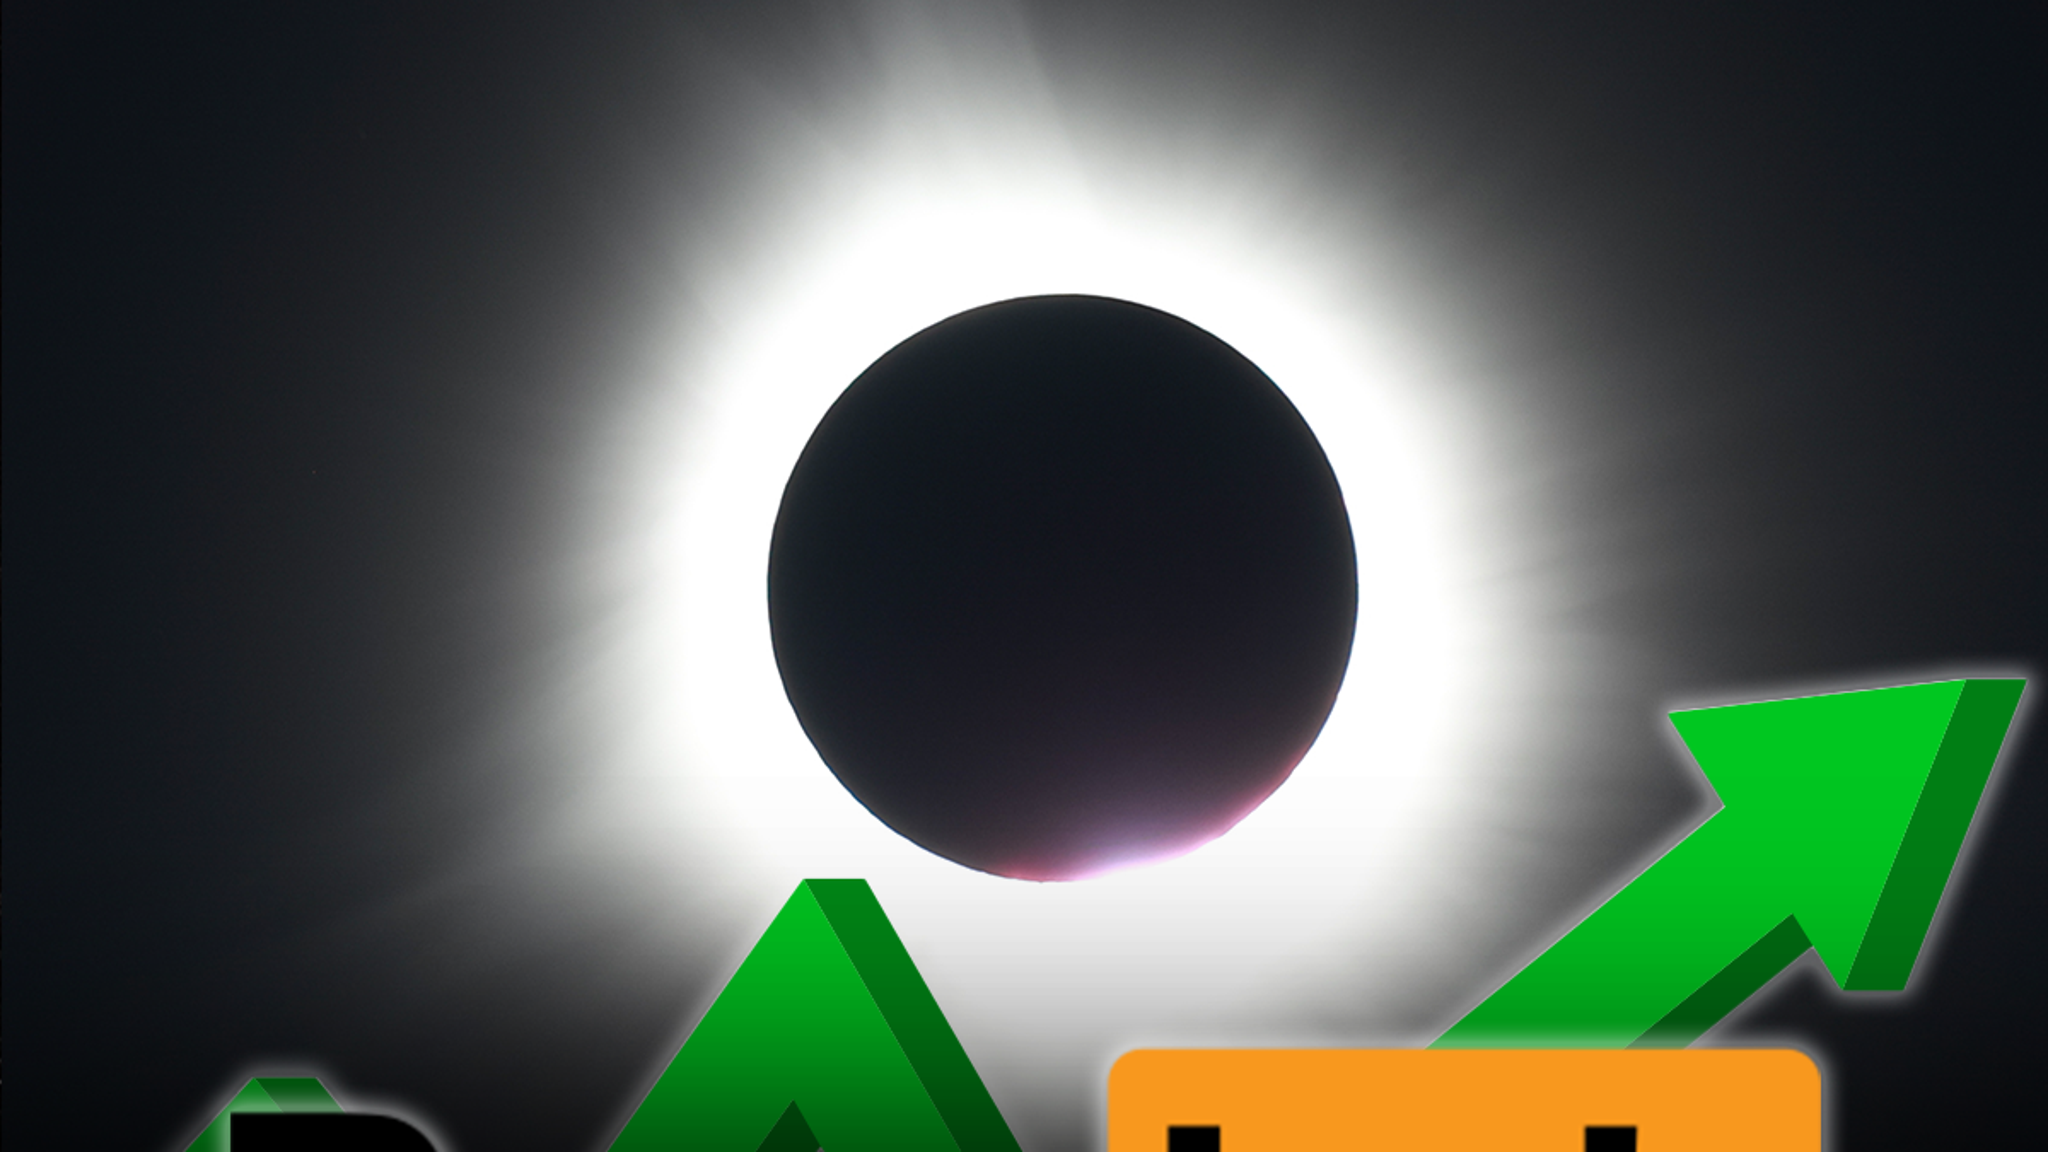 Pornhub Searches For 'Eclipse' Skyrocket Amid Total Solar Eclipse